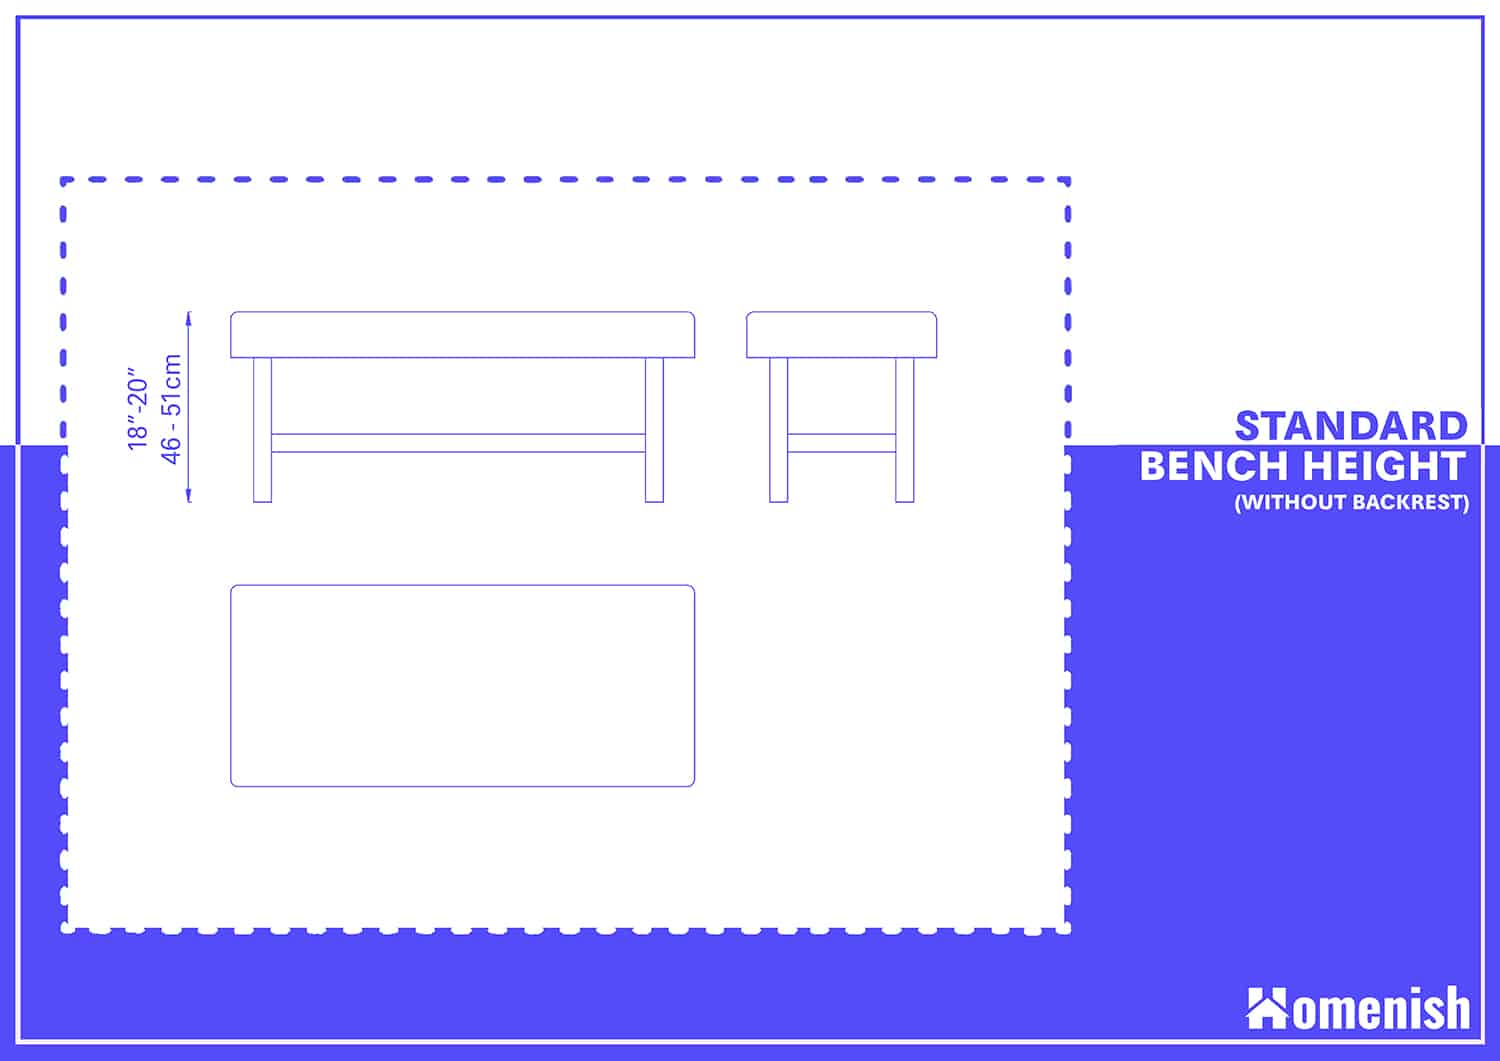 Standard Bench Height Without a Backrest